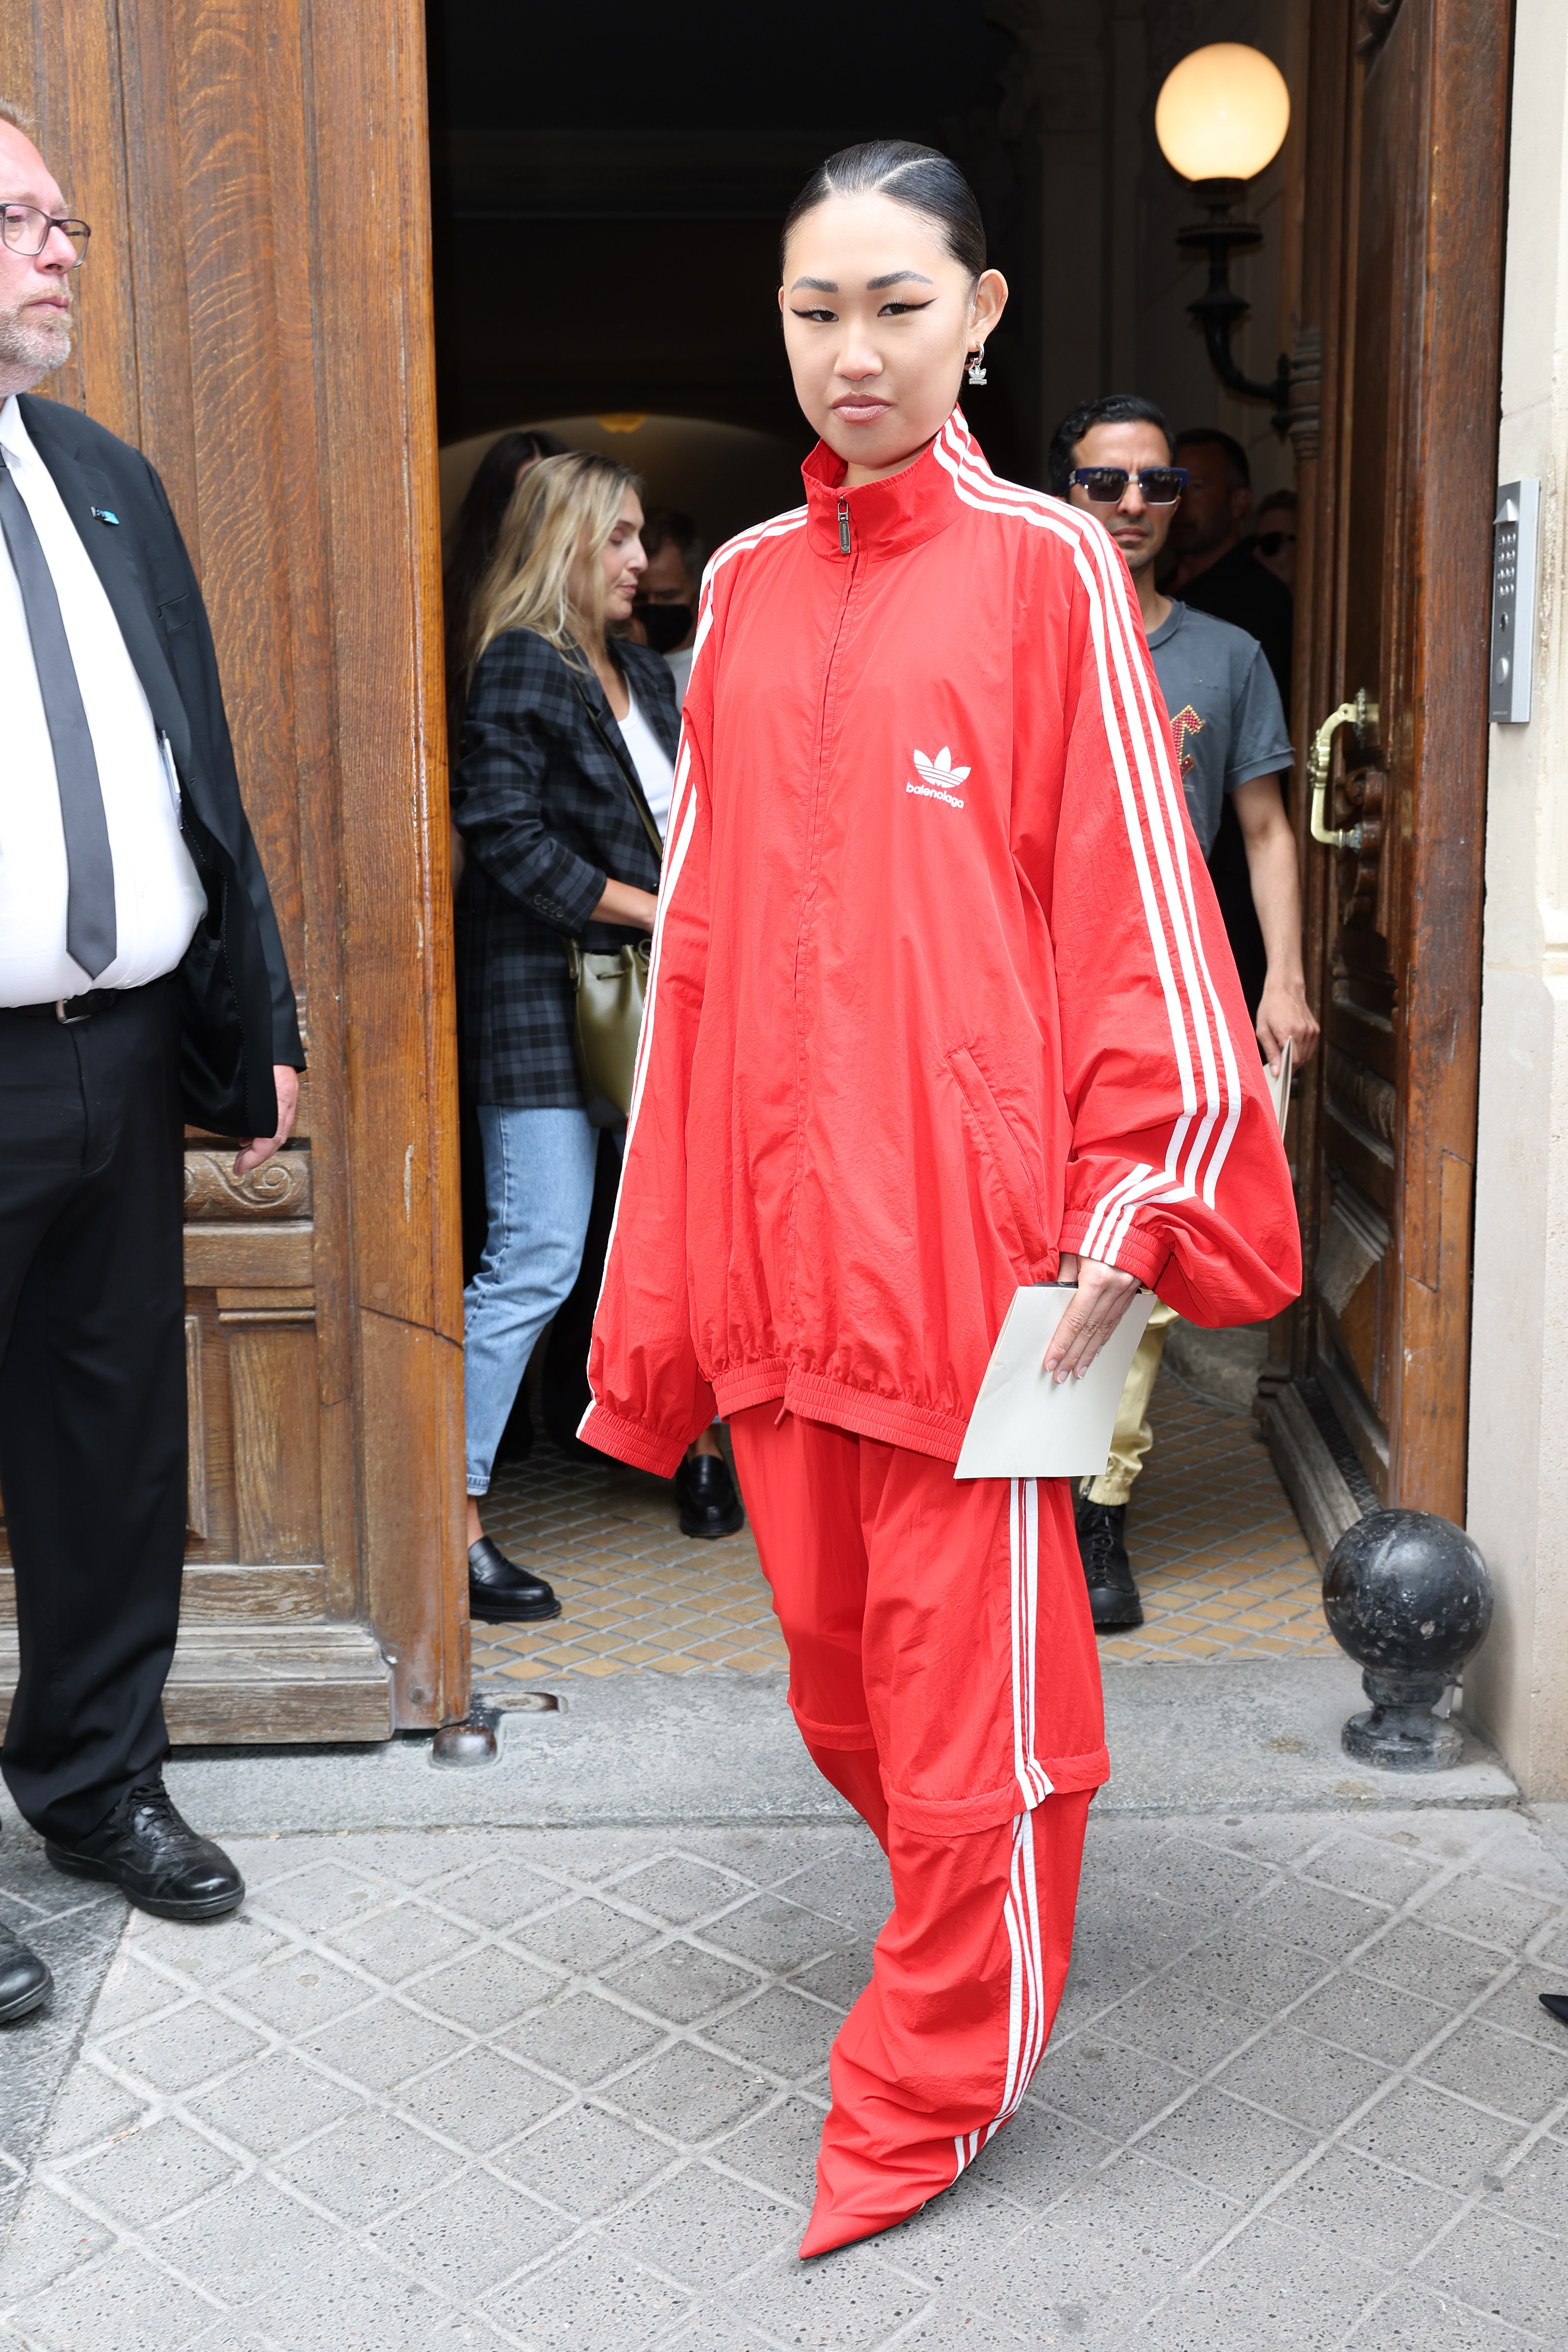 Person in a red designer tracksuit steps out of a building, style focus